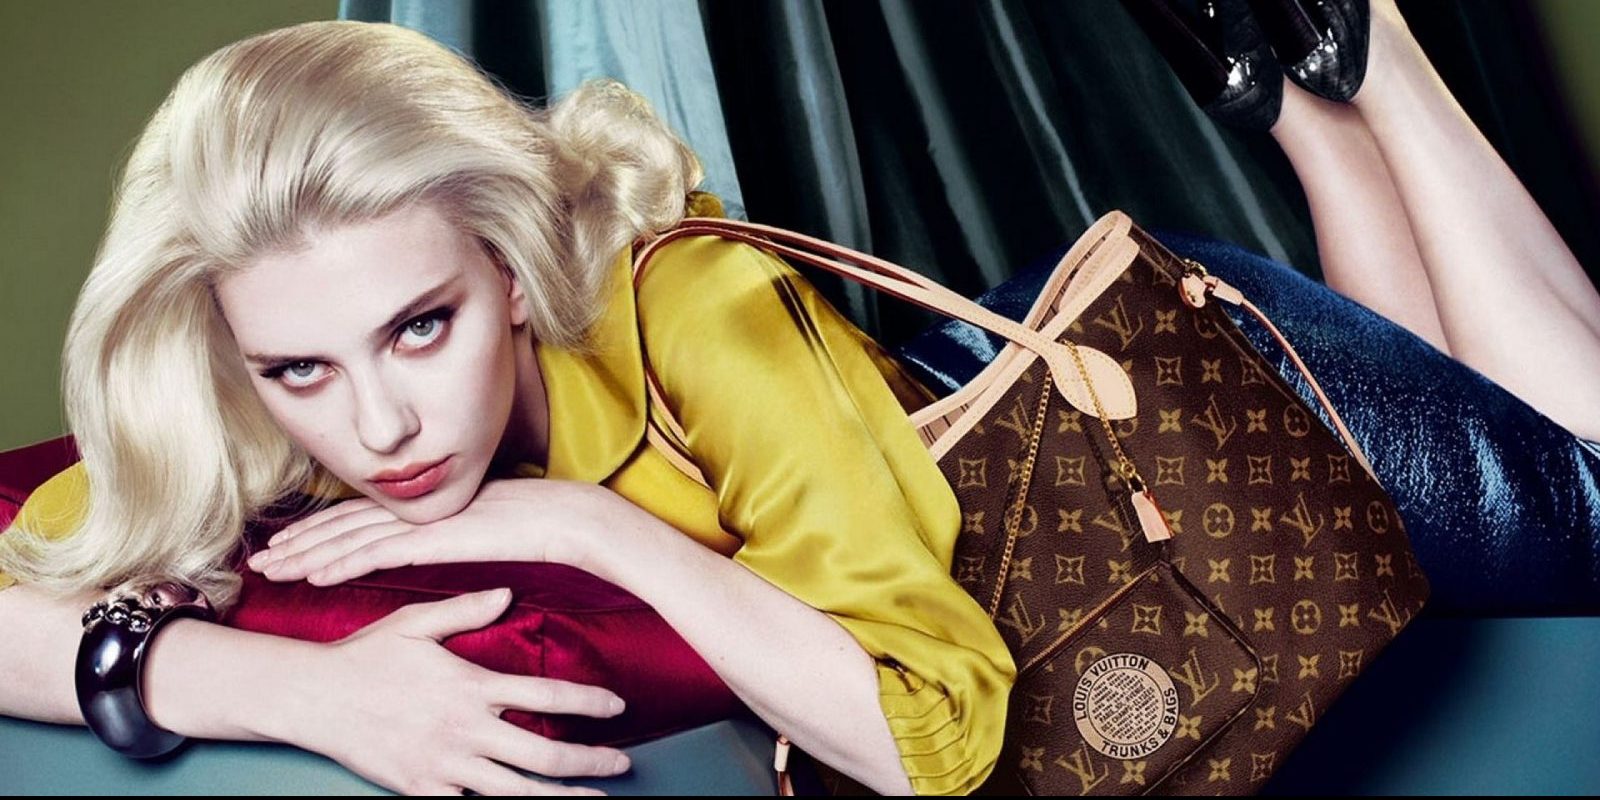 LVMH Moet Hennessey Louis Vuitton Will Not Appeal AMF Ruling Over